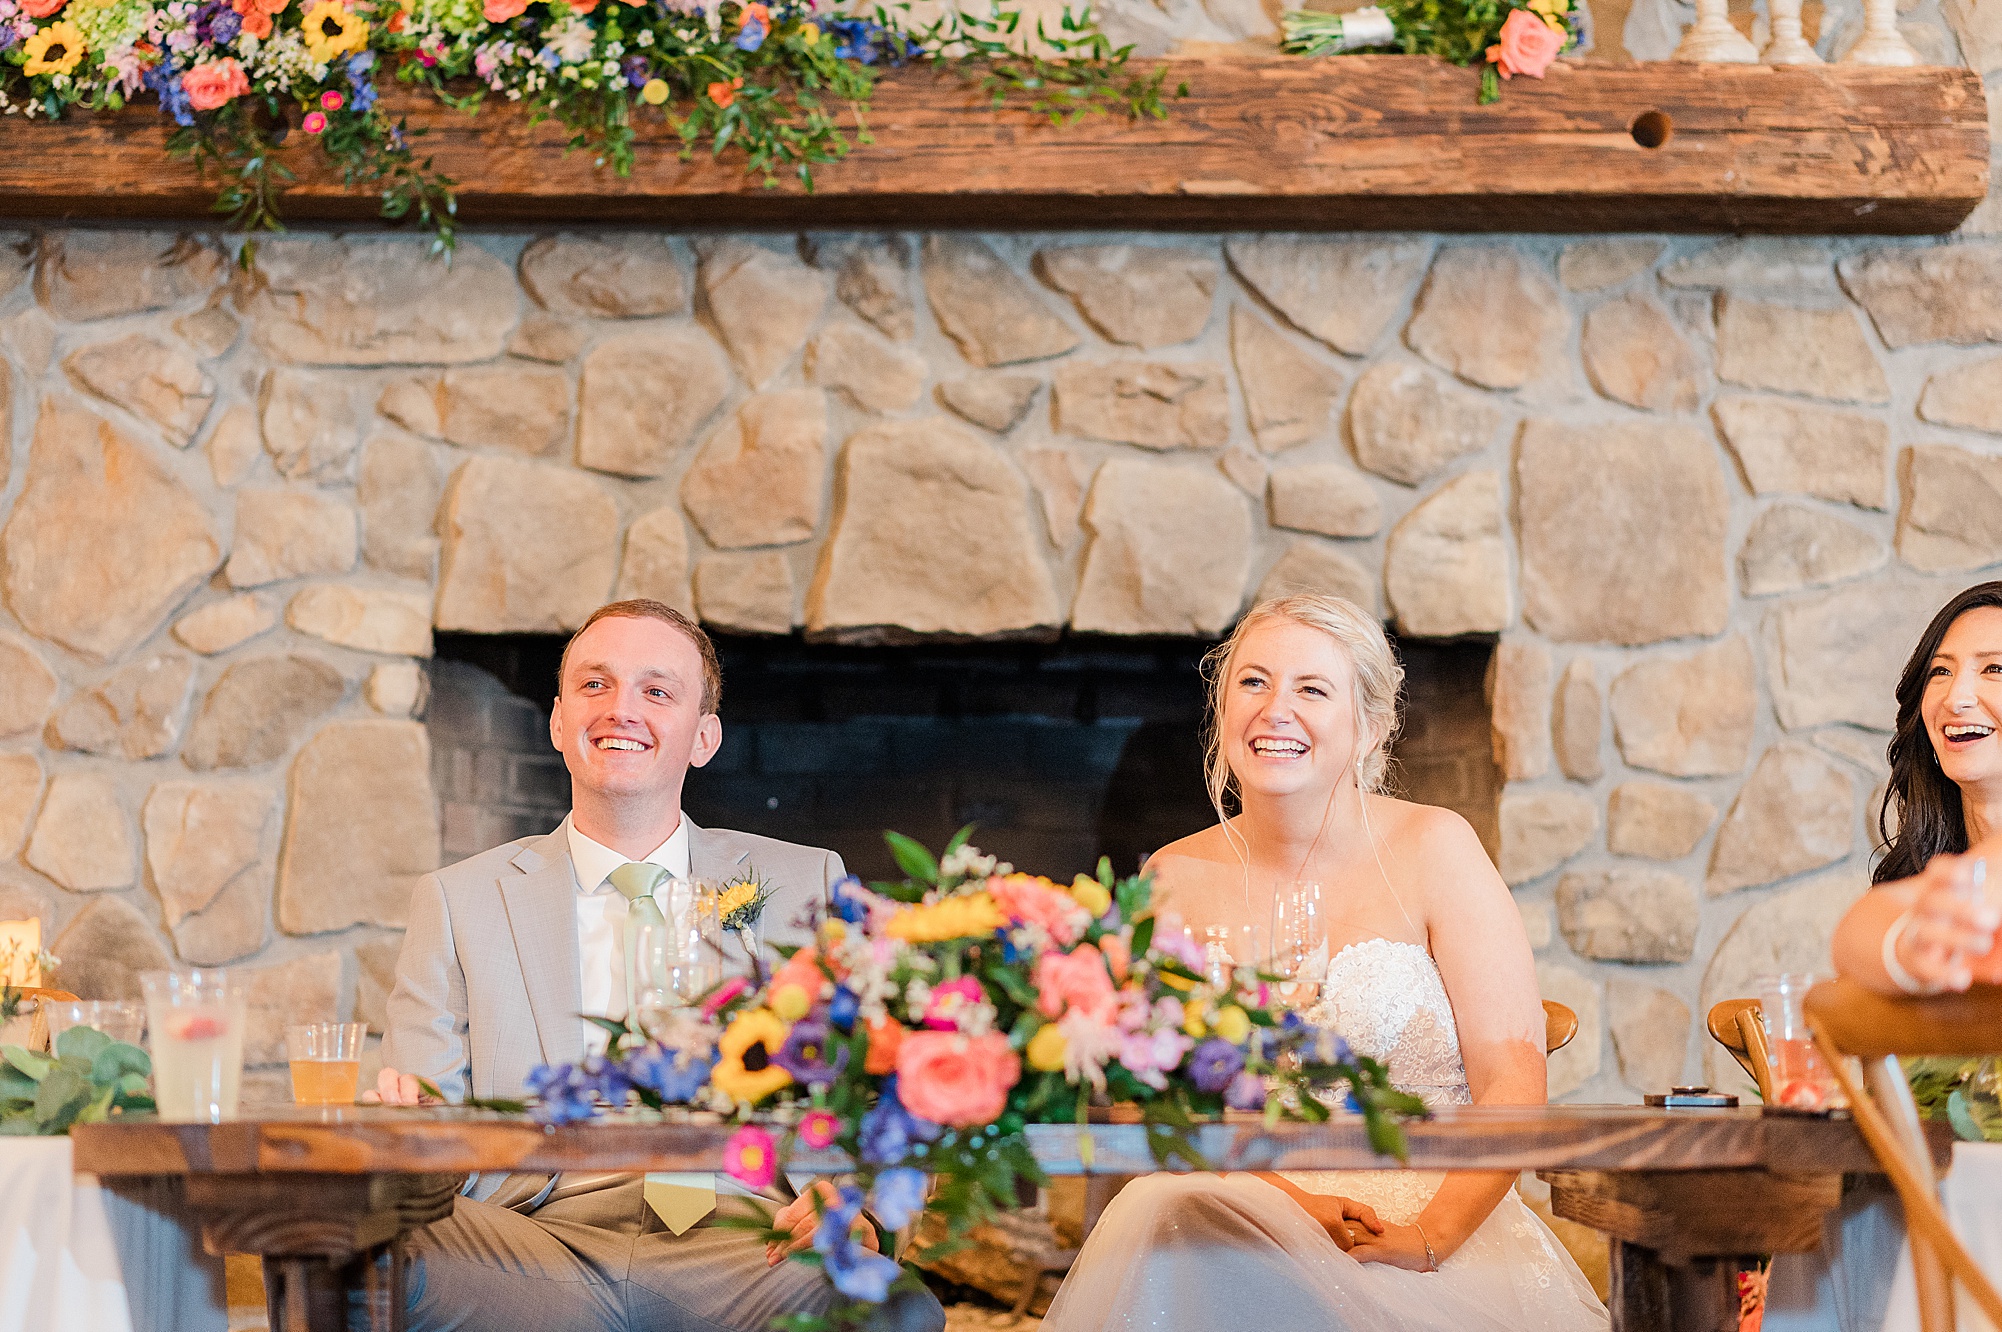 Wedding Reception at Barn at Timber Creek Wedding. Wedding Photography by Kailey Brianne Photography